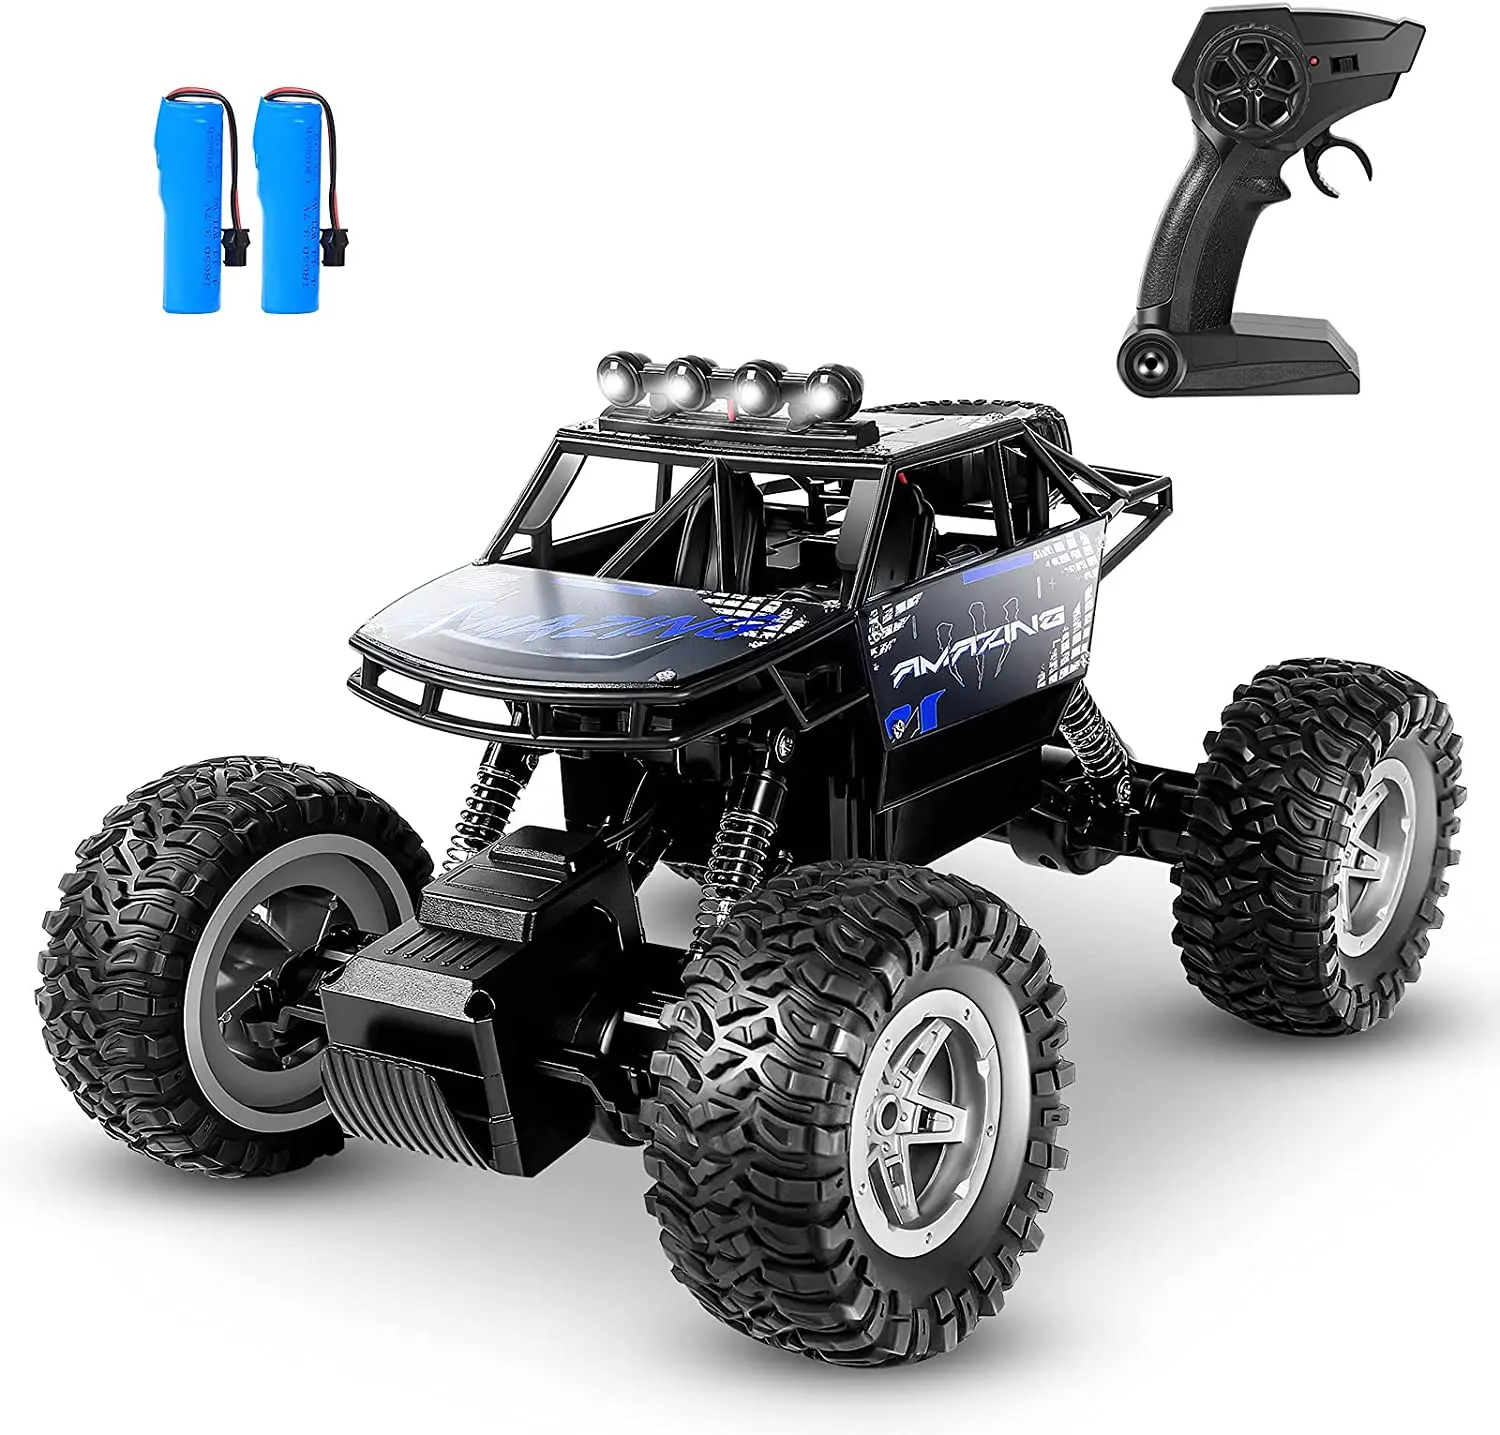 

HENEROAR sRCr Cars,1:14 Scale All Terrain Remote Control Car, 4WD 2.4GHz Off Road Monster Vehicle RC Truck Crawler with Dualpopr